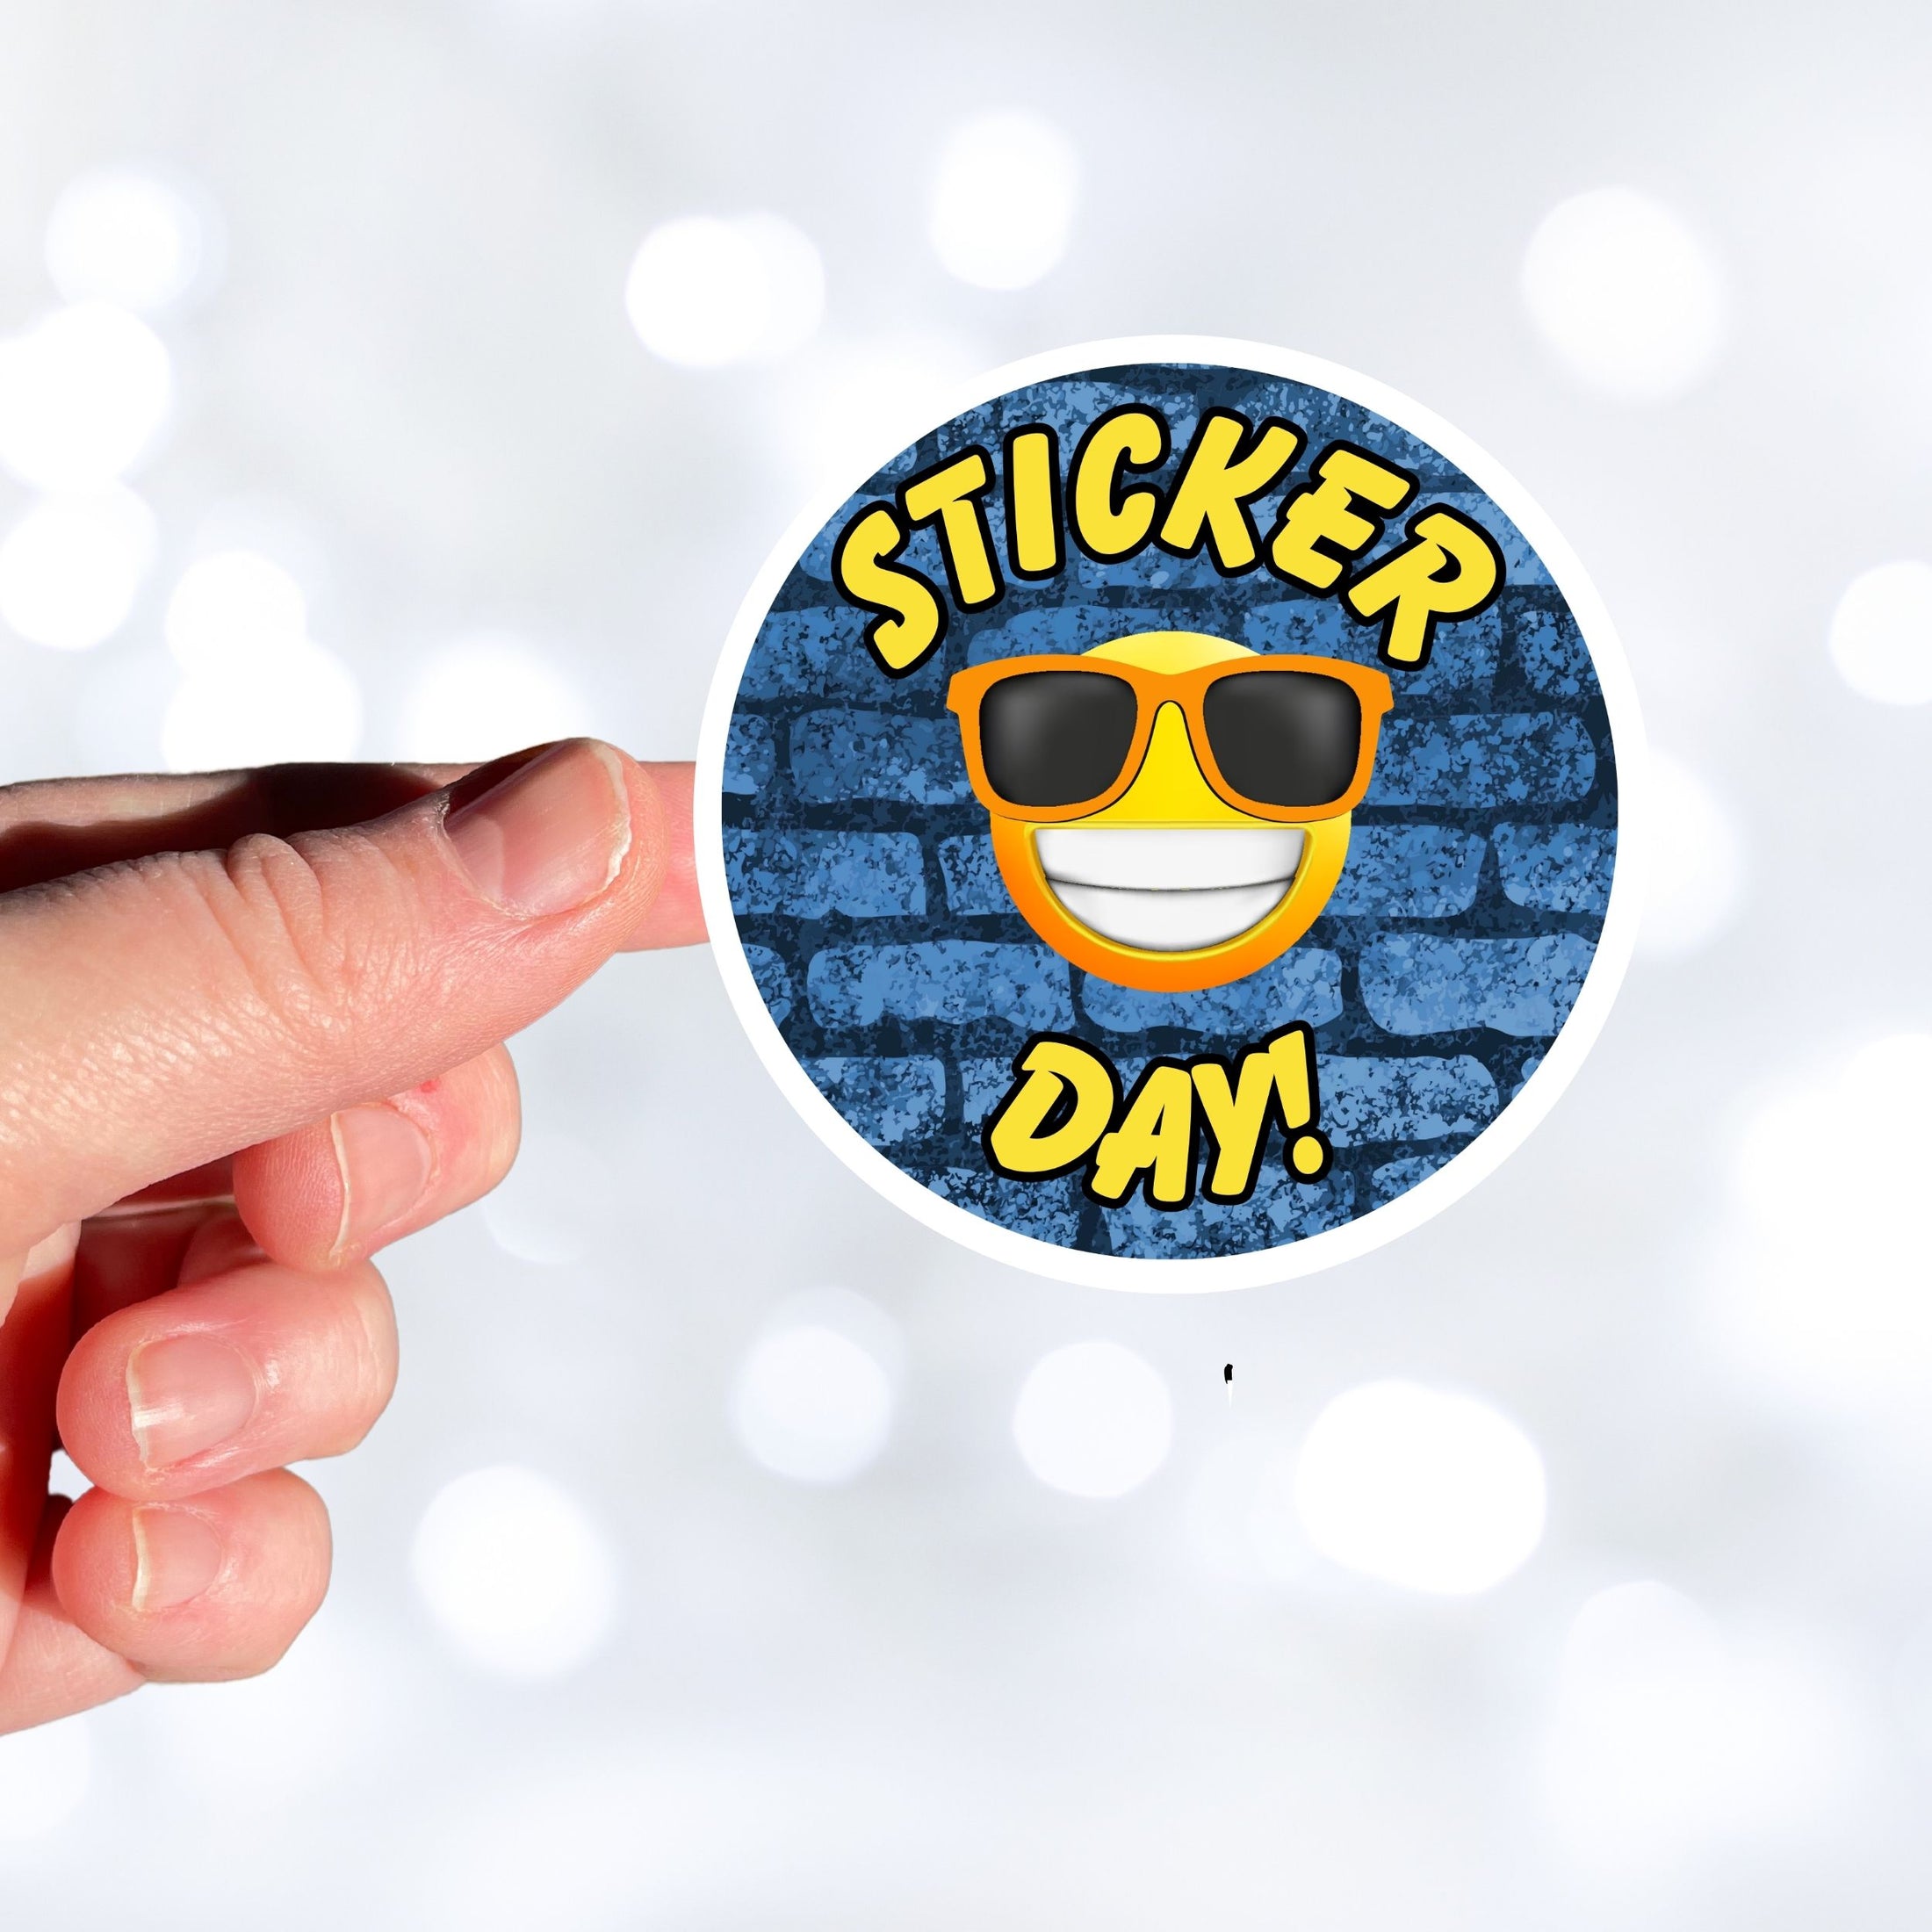 This image shows a hand holding the sticker day sticker.